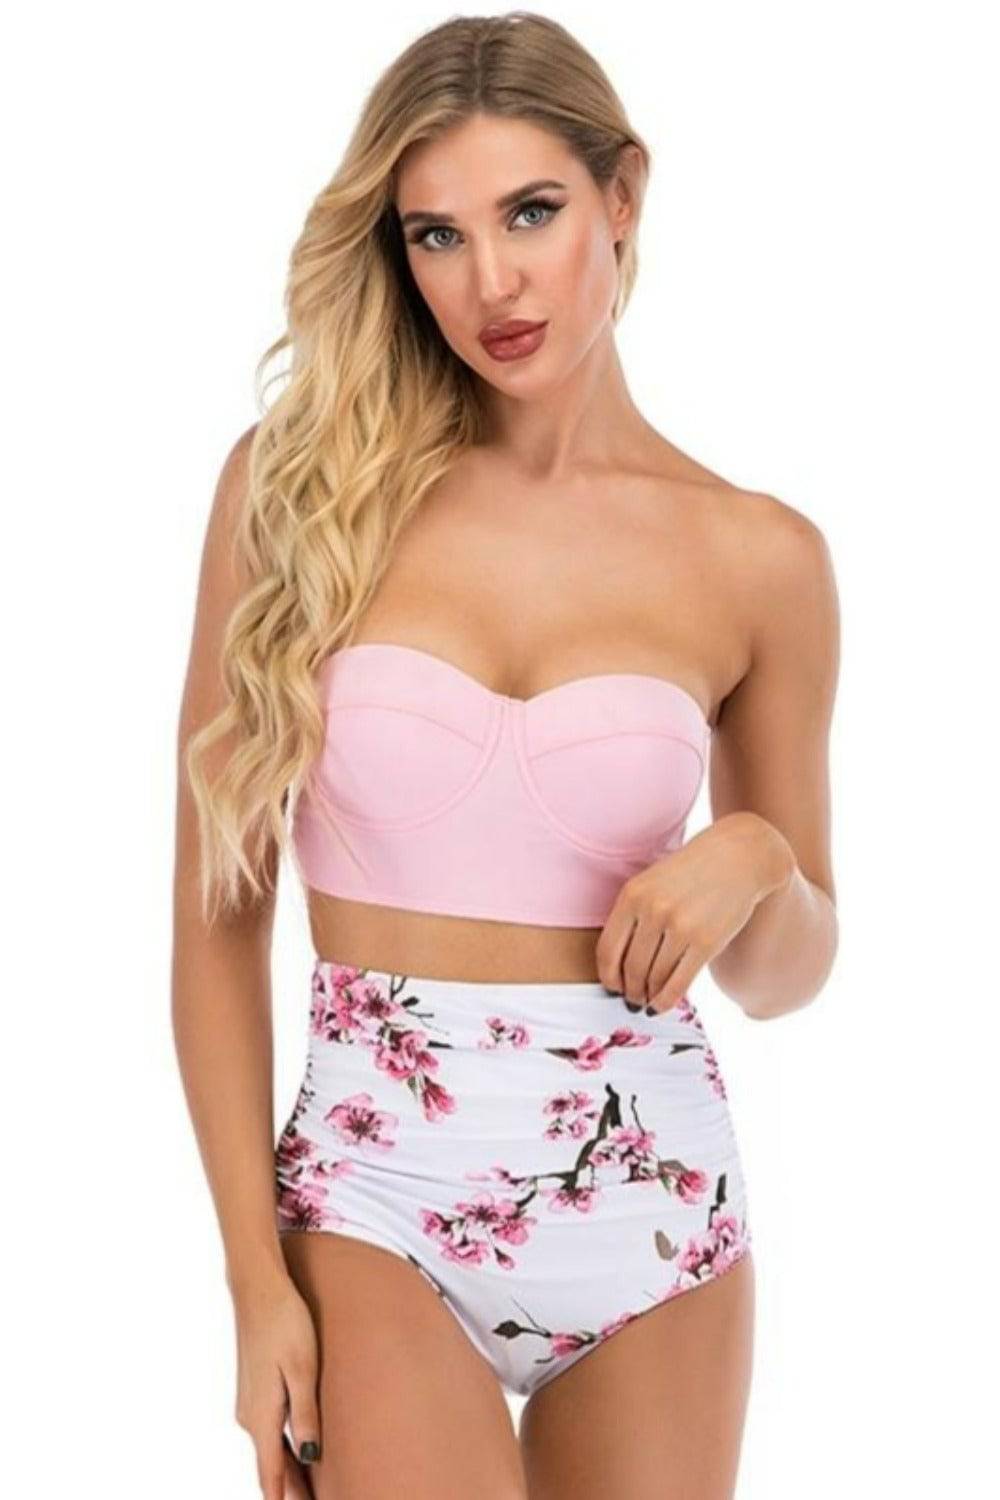 Pink Floral Bikini High Waisted Bustier Bra Two-Piece Swimsuit - TGC Boutique - Swimsuit